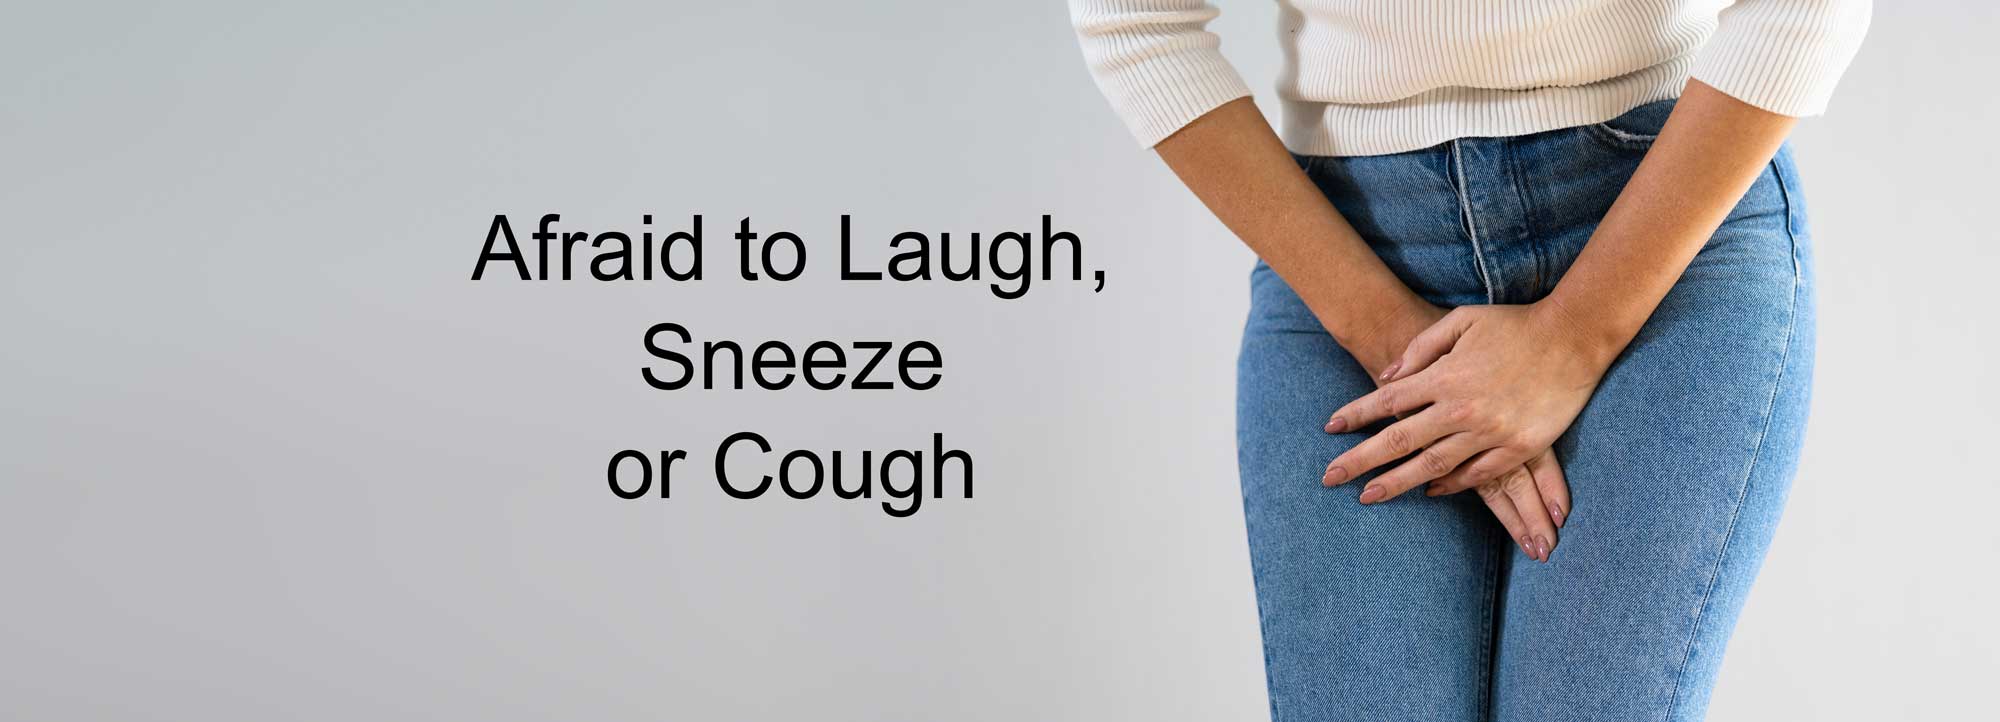 Urine leakage during laughing 😂 coughing or sneezing 🤧 is due to